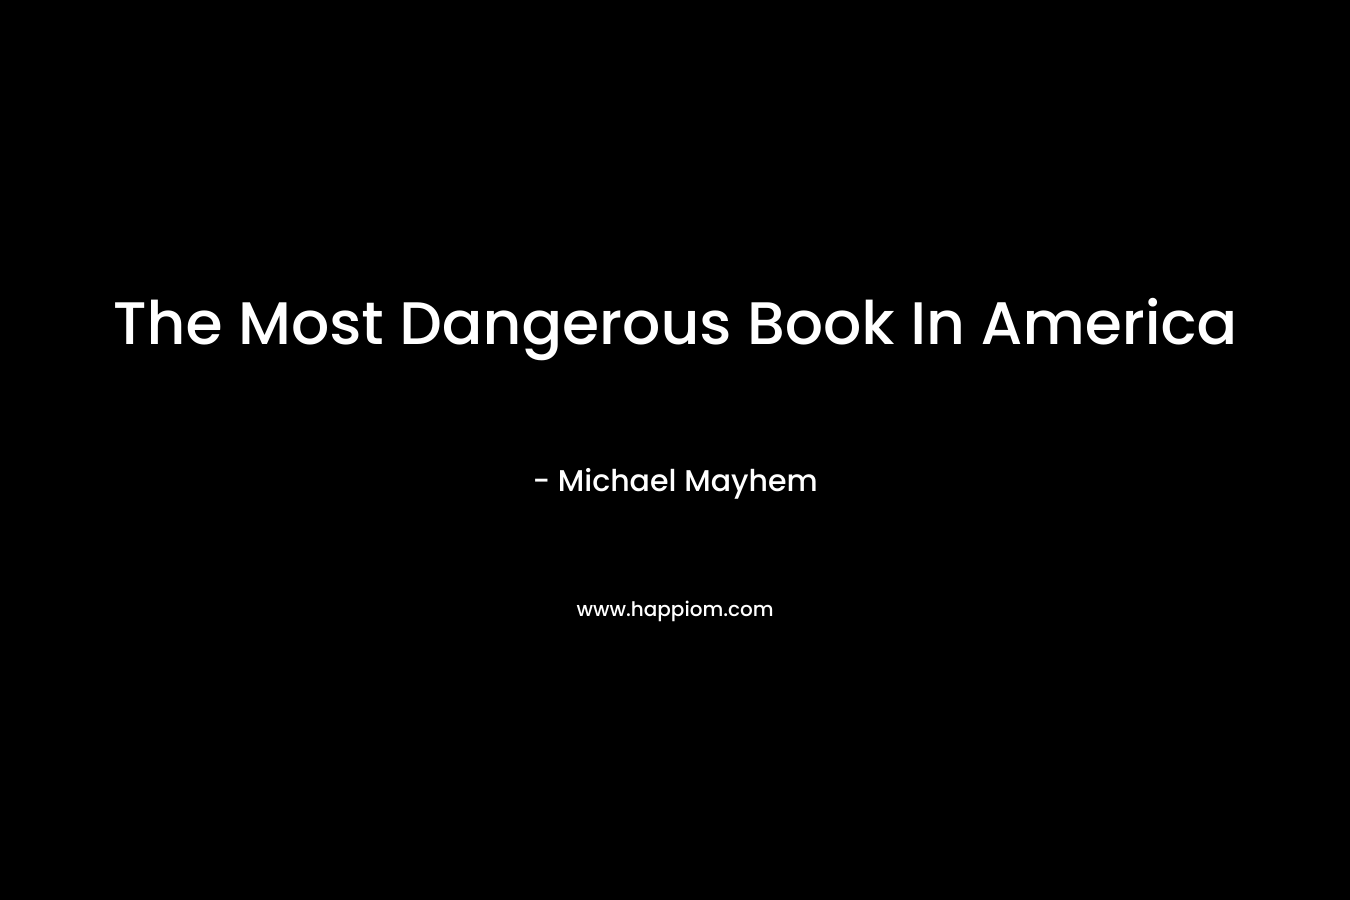 The Most Dangerous Book In America